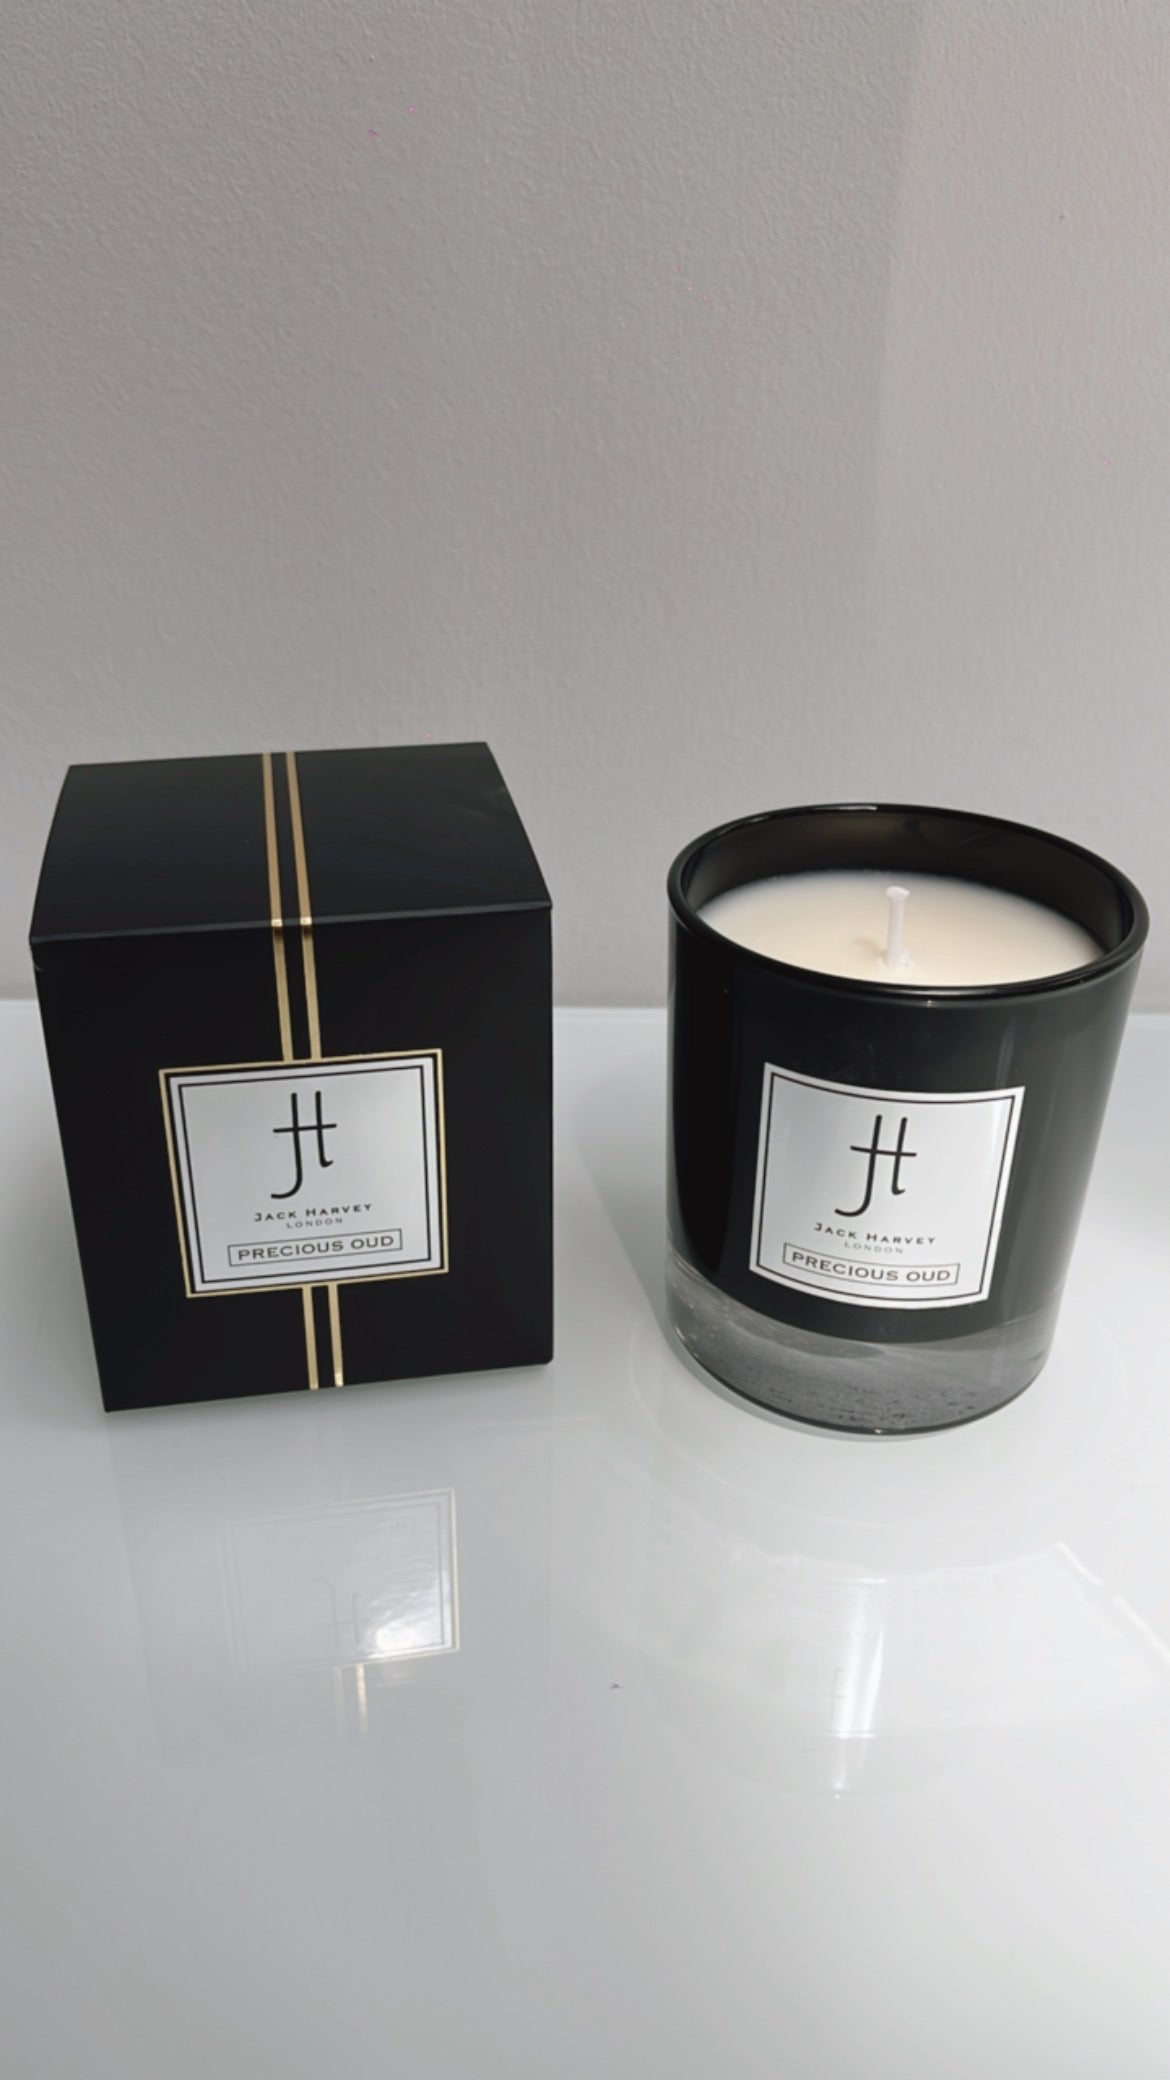 KNIGHTSBRIDGE BKACK - LUXURY SCENTED CANDLE 30cl - Limited Edition Matte Black